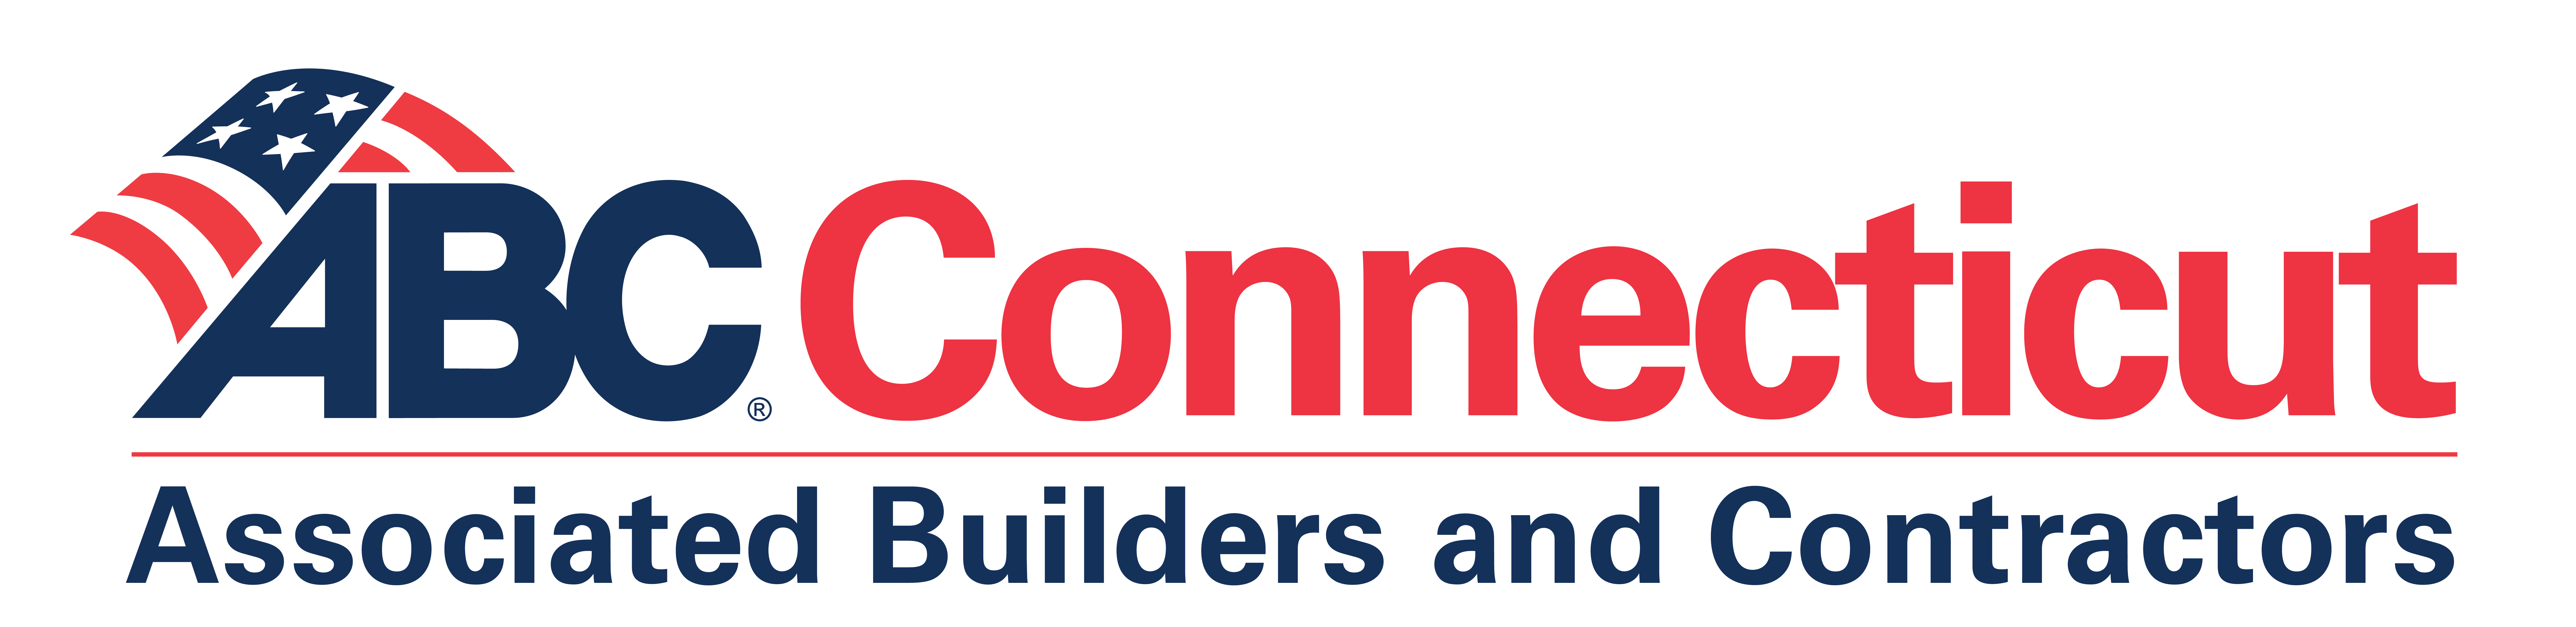 Associated Builders and Contractors, Inc. - Connecticut Chapter